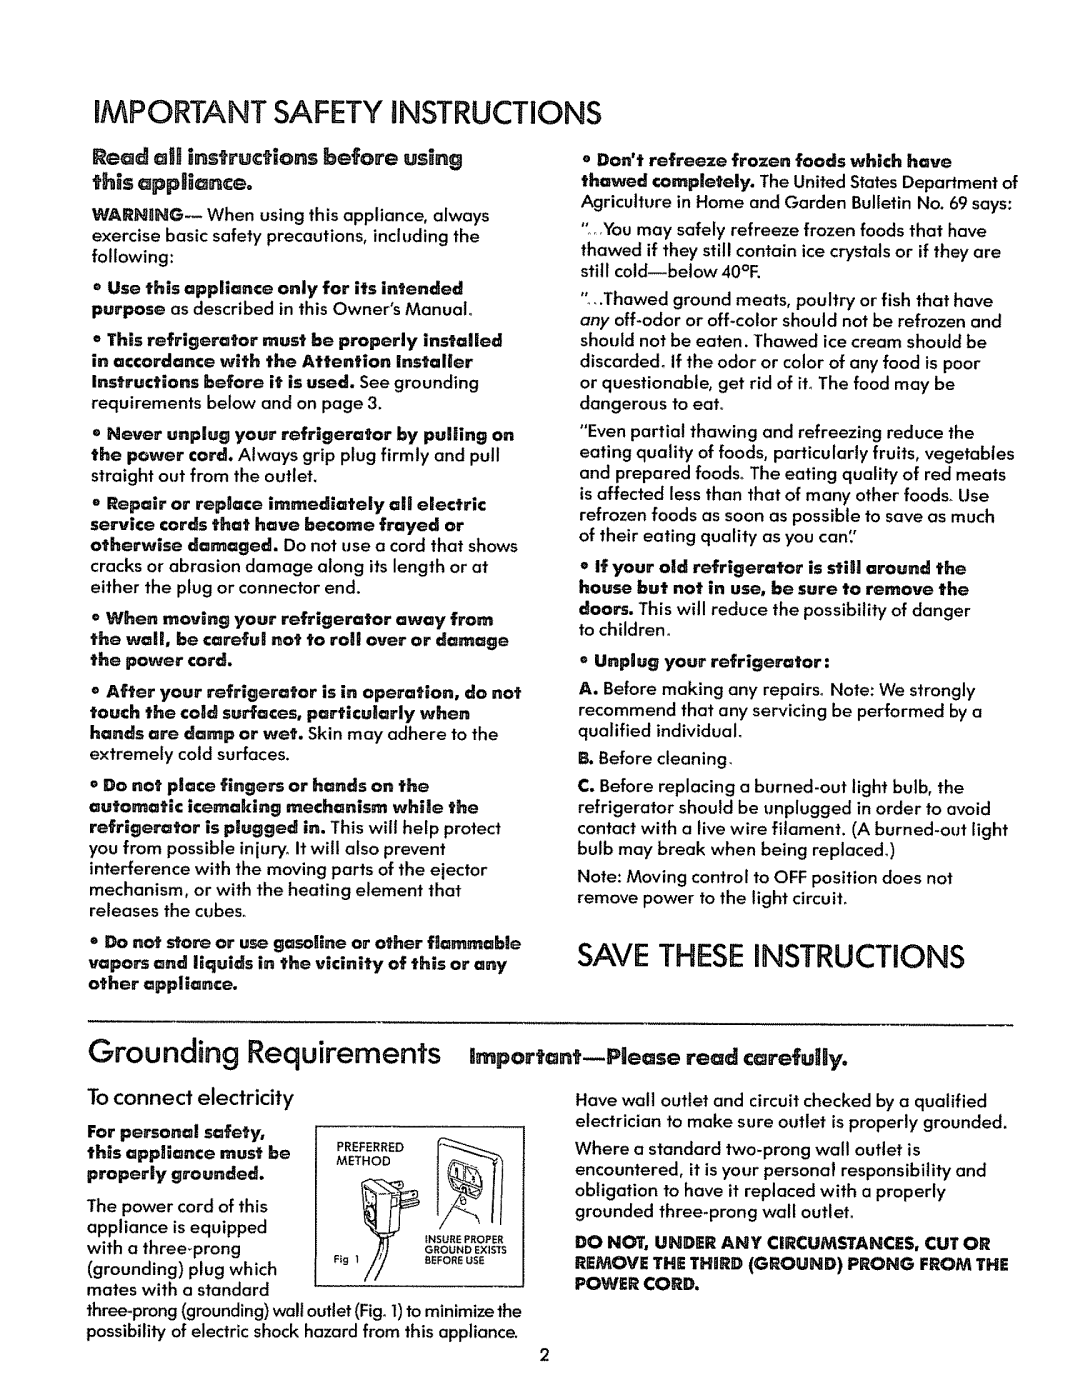 Sears 71578, 71579 iMPORTANT SAFETY INSTRUCTIONS, SAVE THESEiNSTRUCTIONS, Grounding Requirements, To connect electricity 